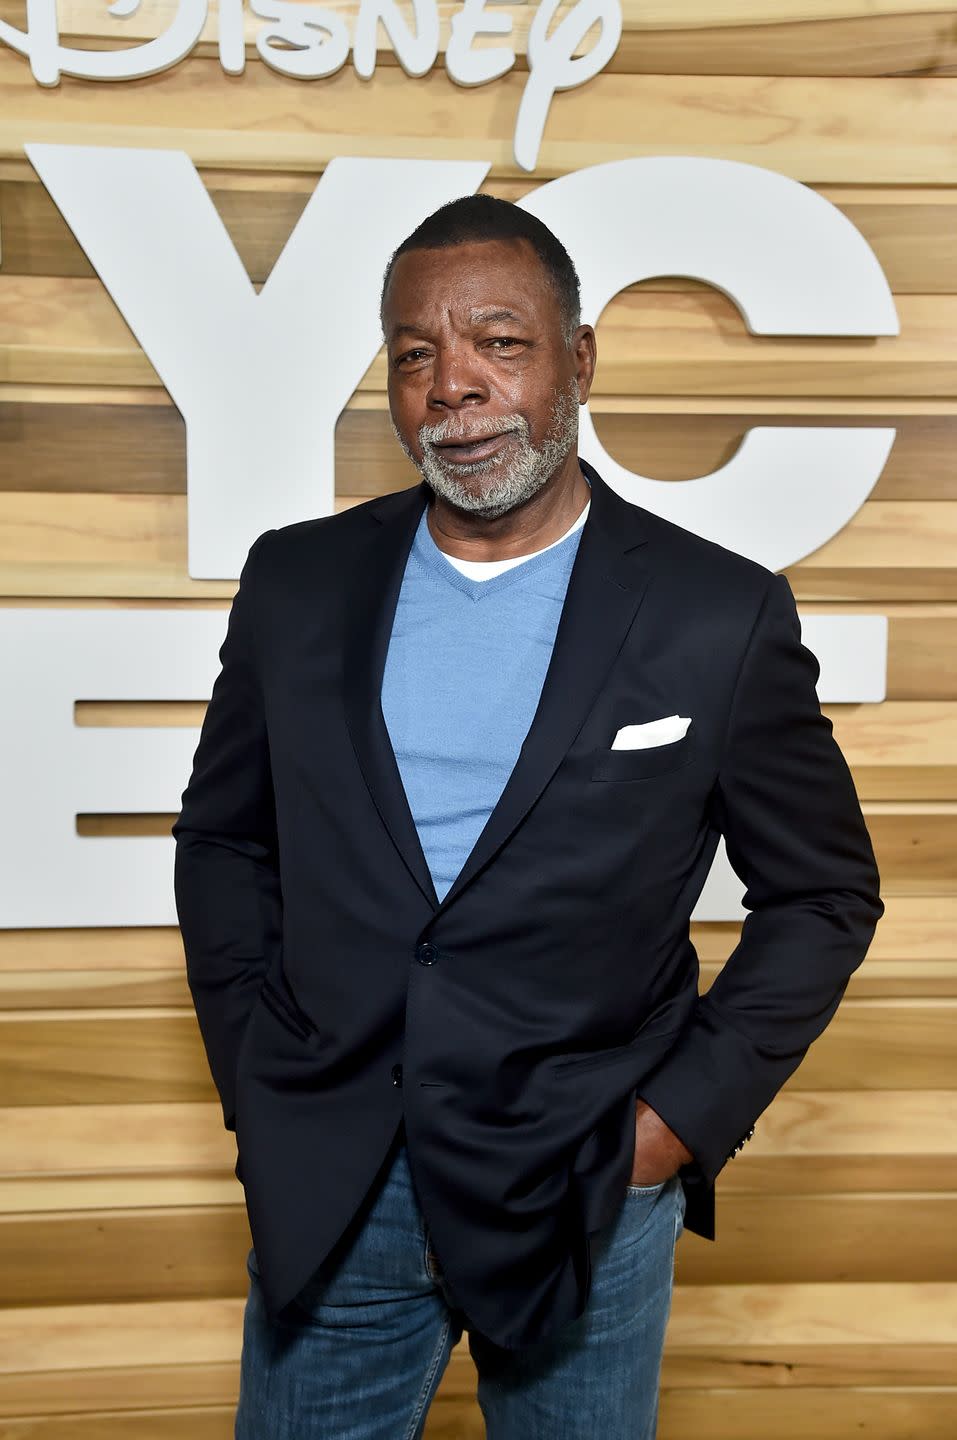 carl weathers attends the mandalorian fyc event in california